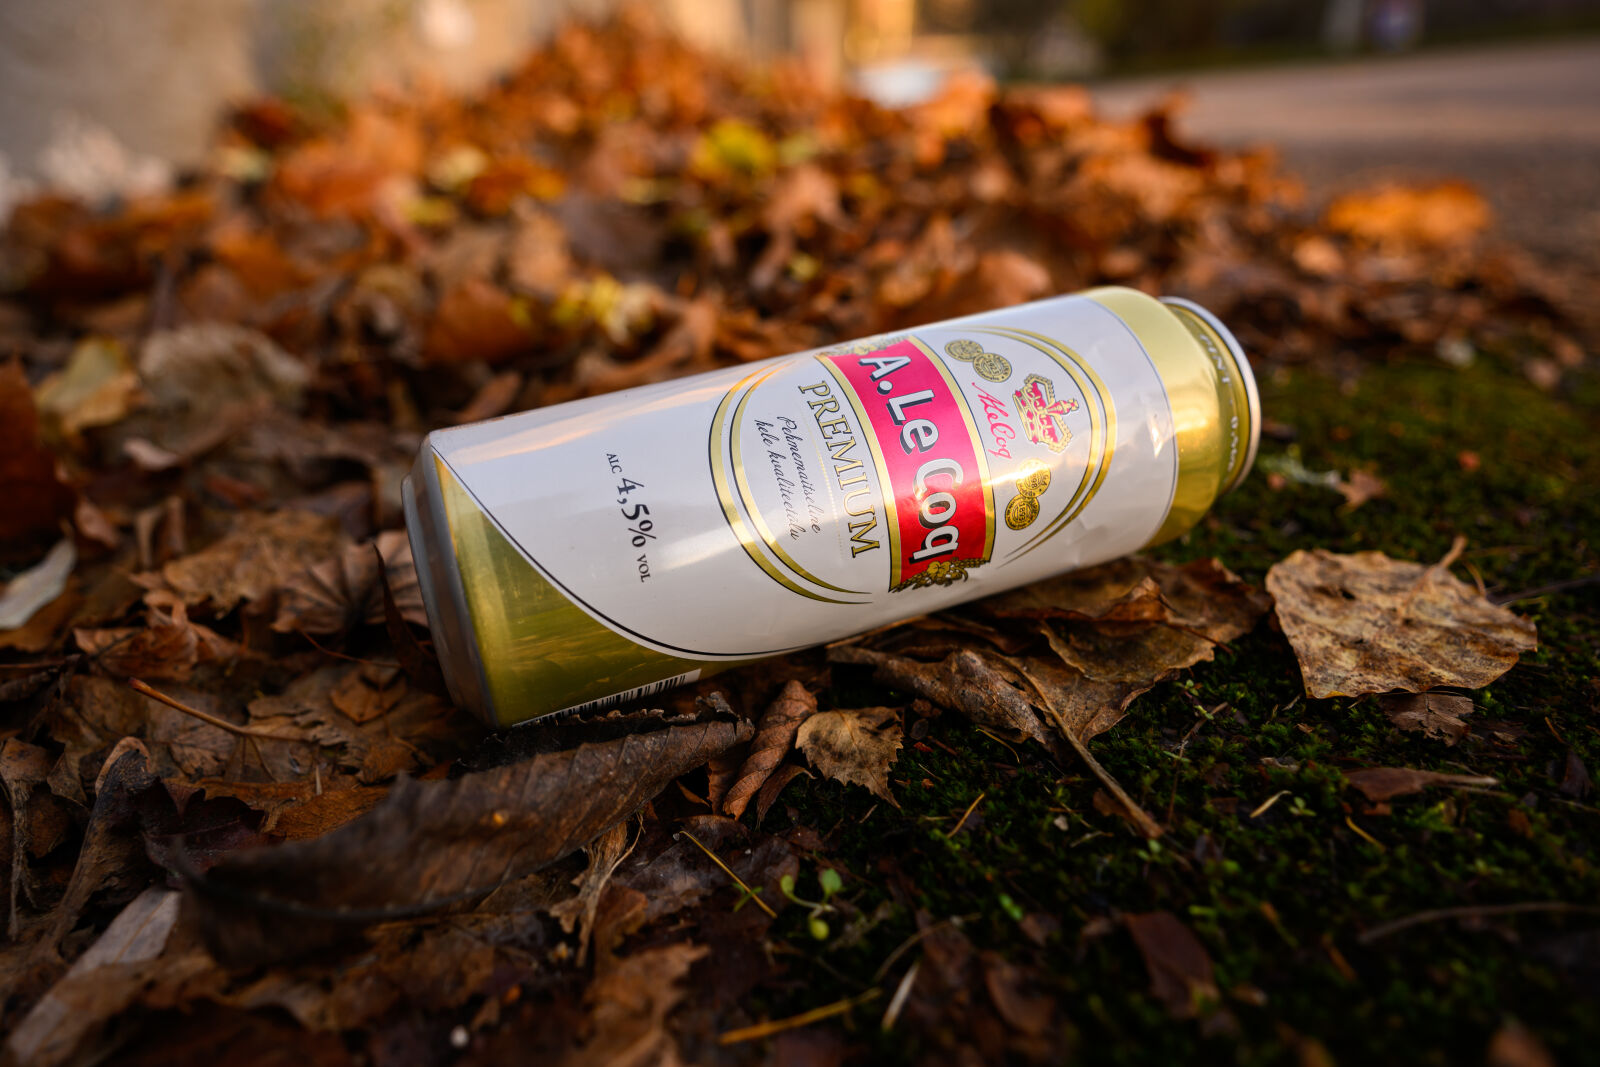 Nikon Z9 sample photo. Beer can littering photography